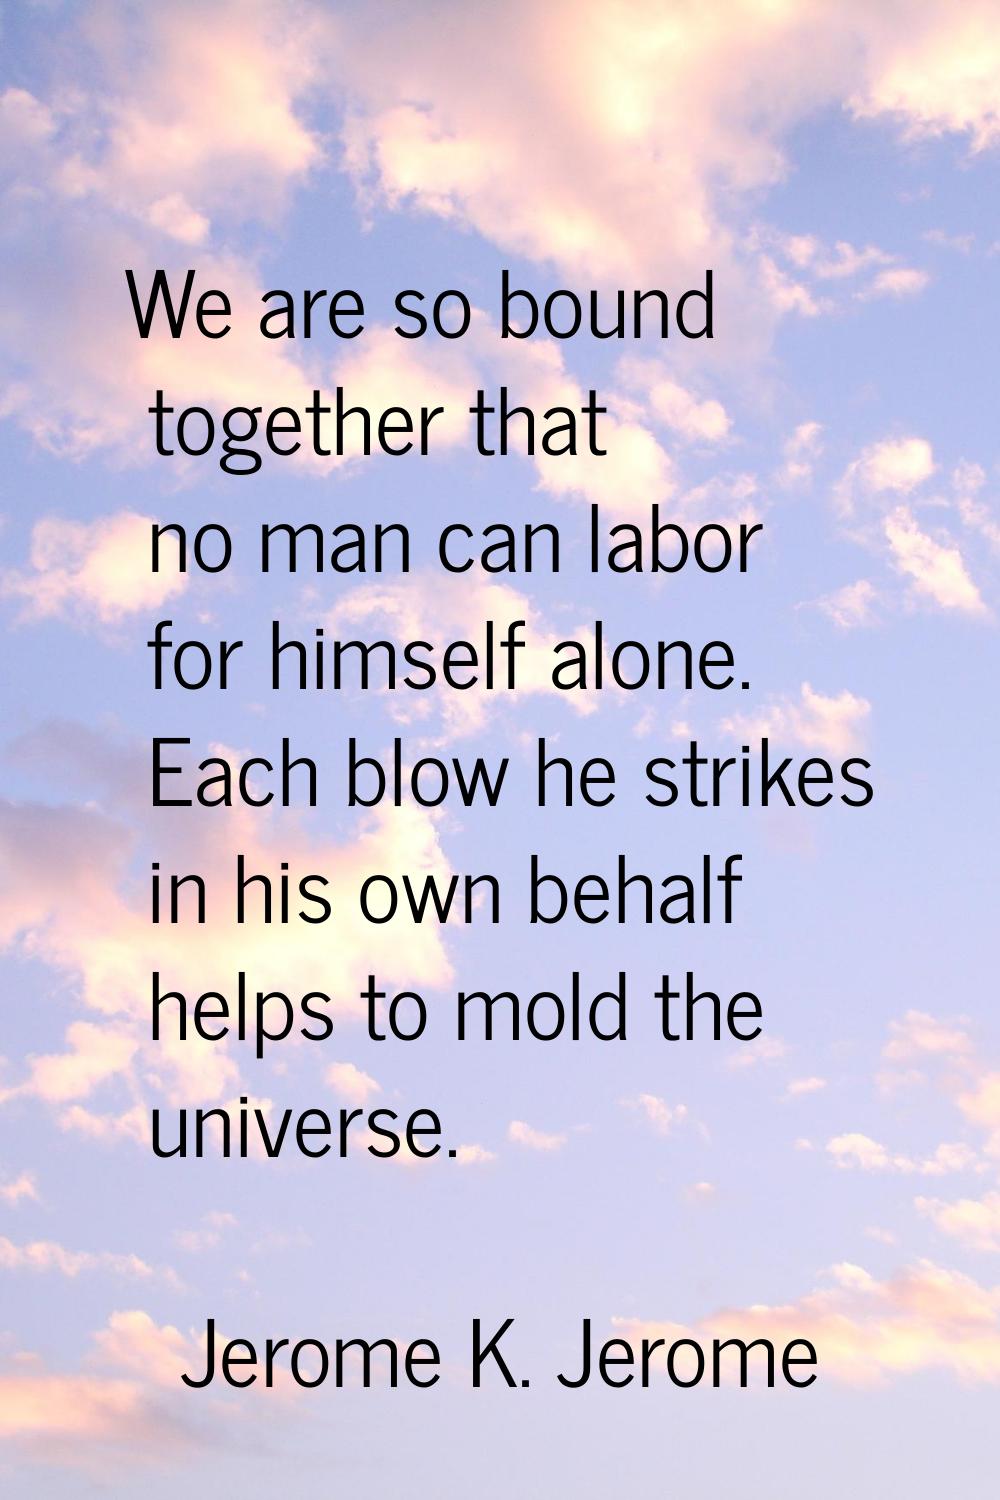 We are so bound together that no man can labor for himself alone. Each blow he strikes in his own b